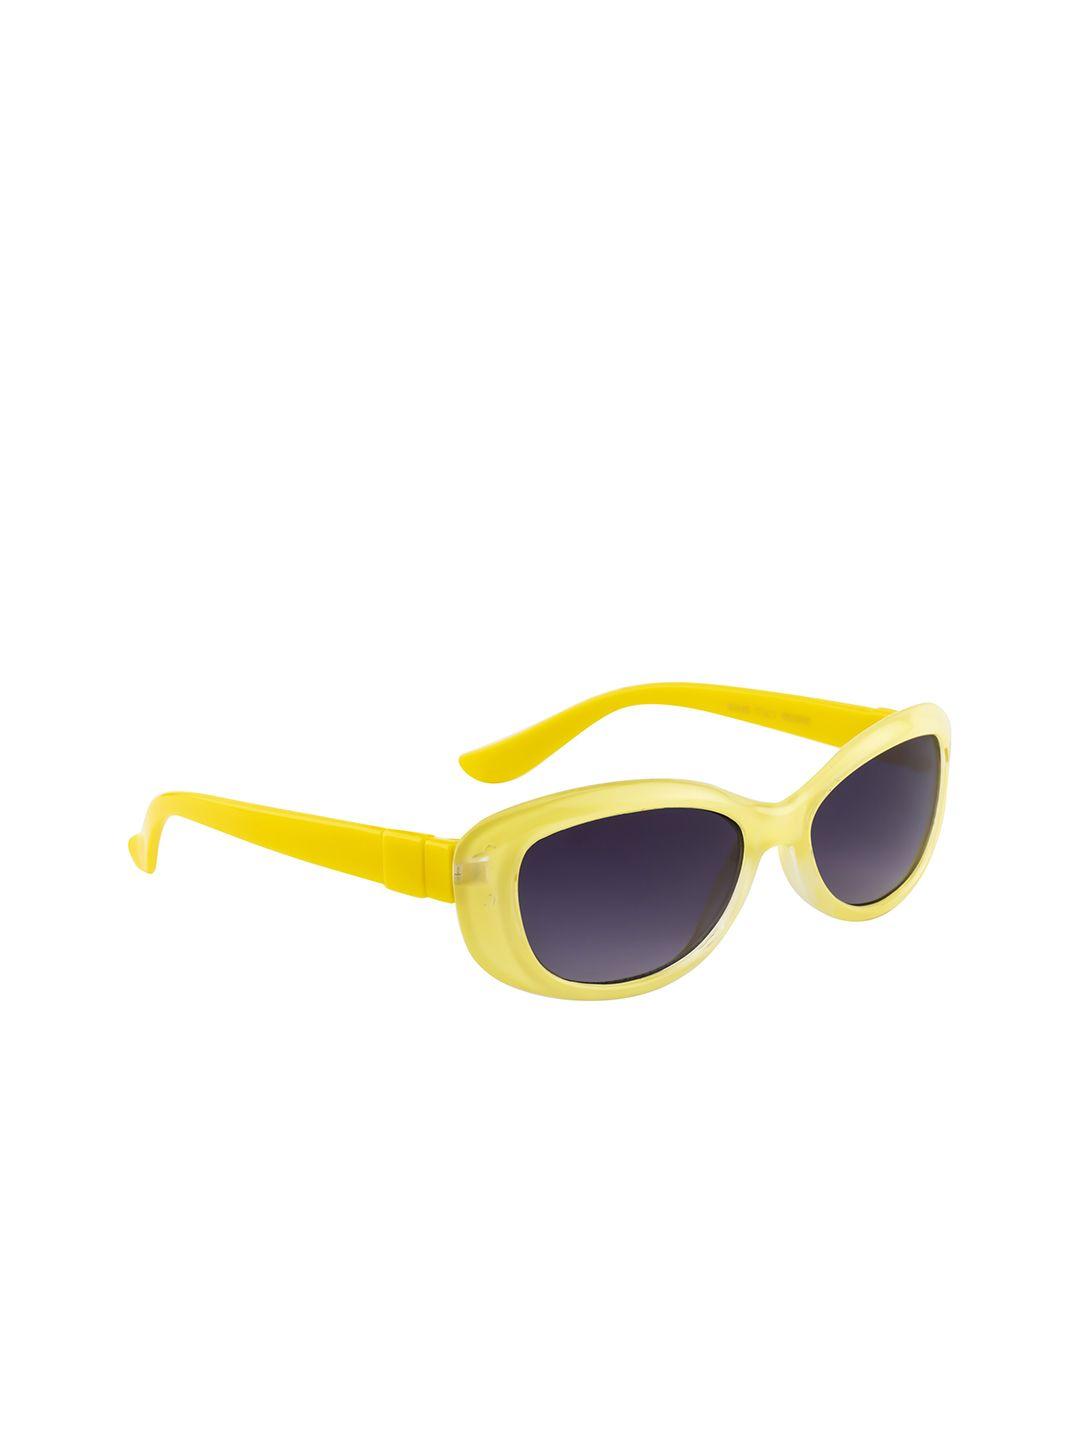 yk unisex kids oval sunglasses with uv protected lens yk-j8192